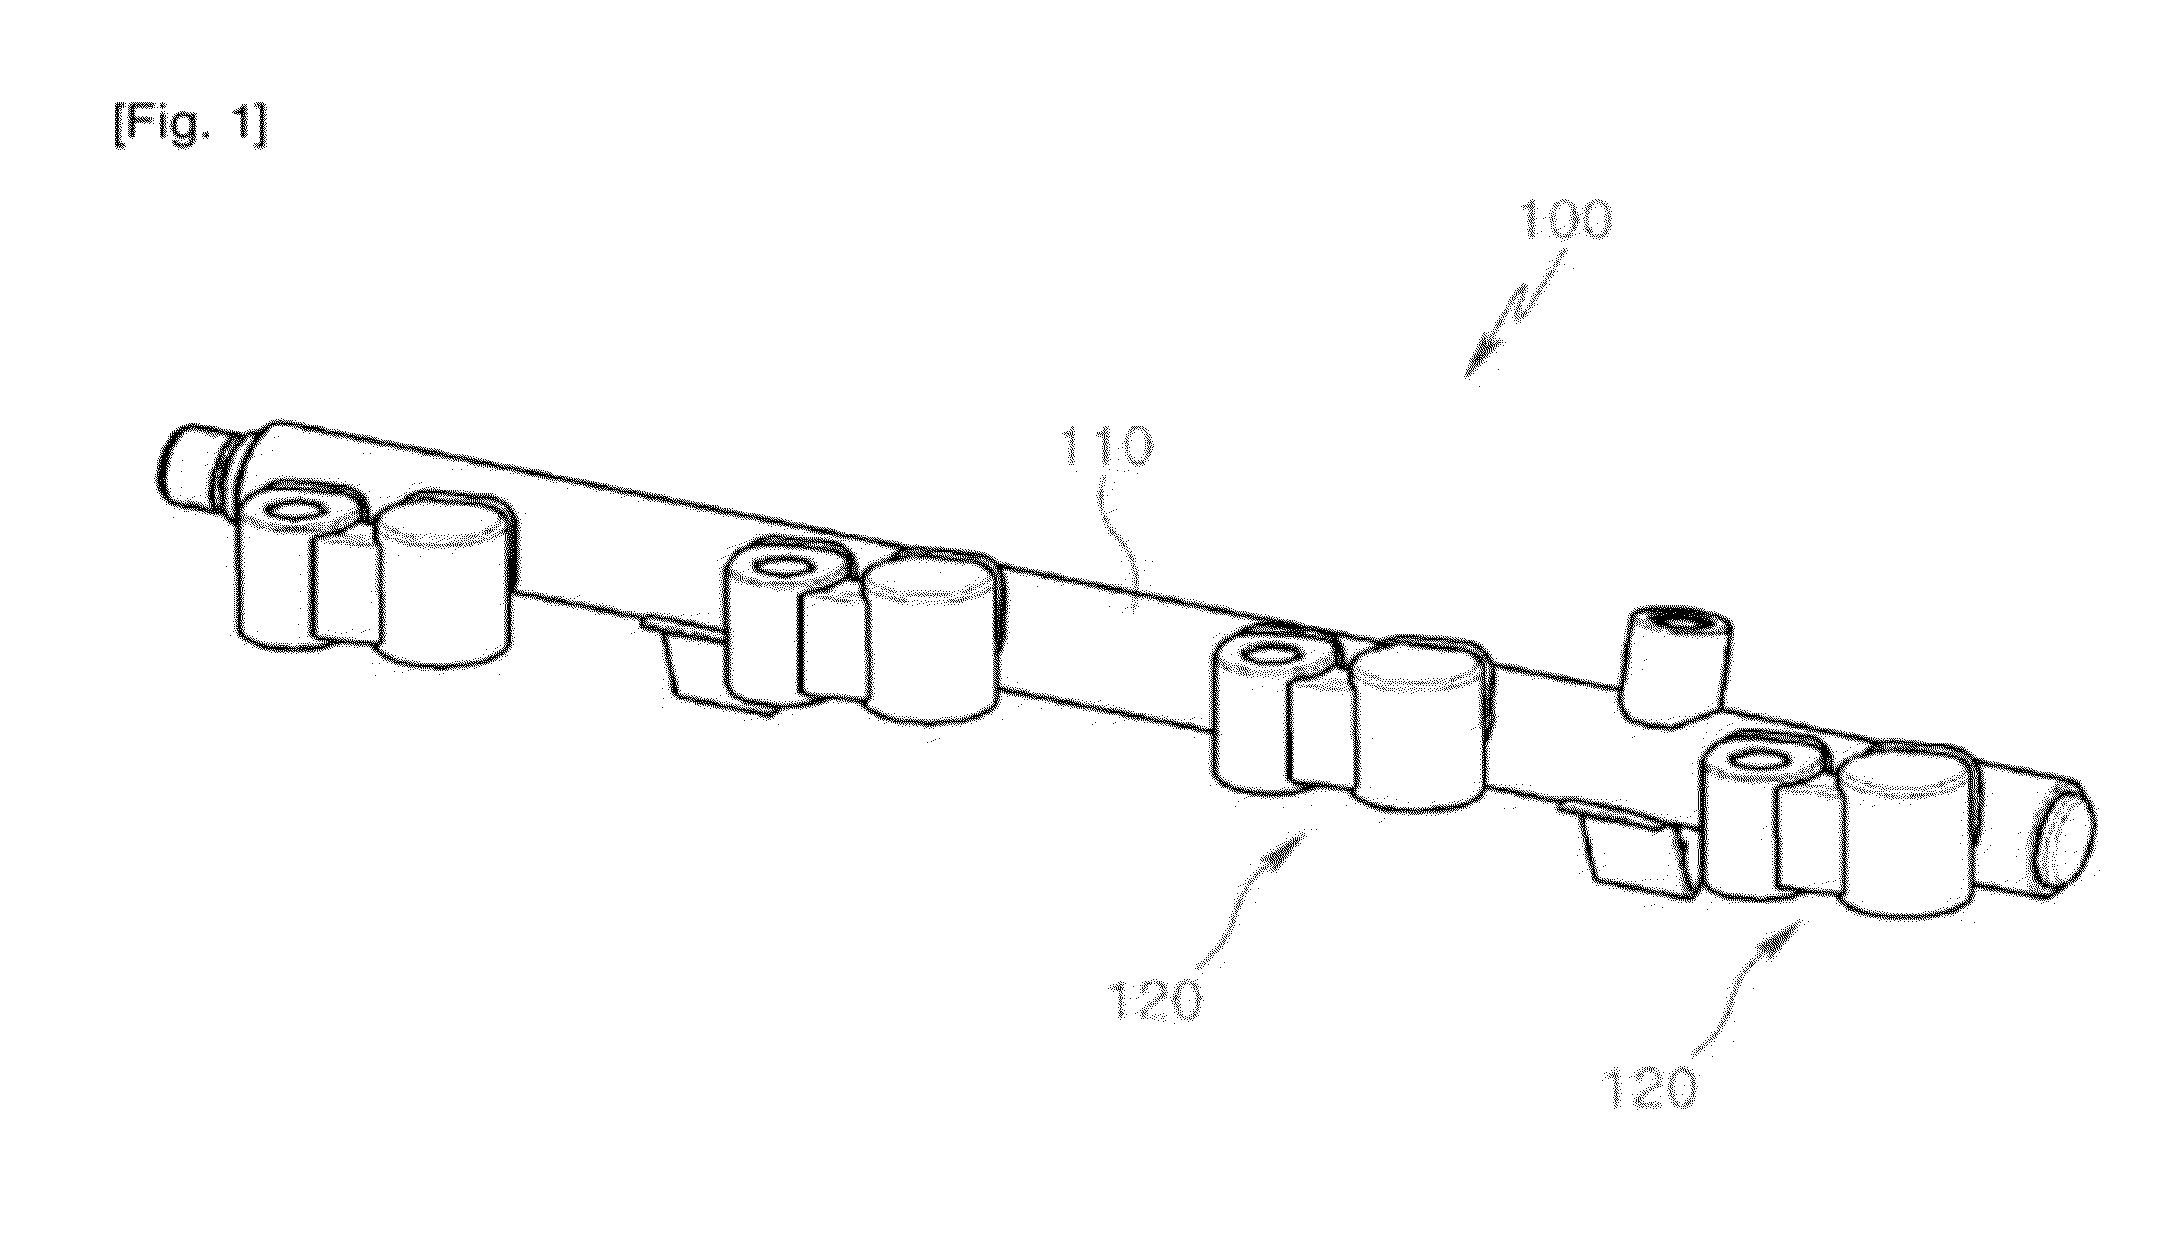 Mounting structure for a direct injection fuel rail